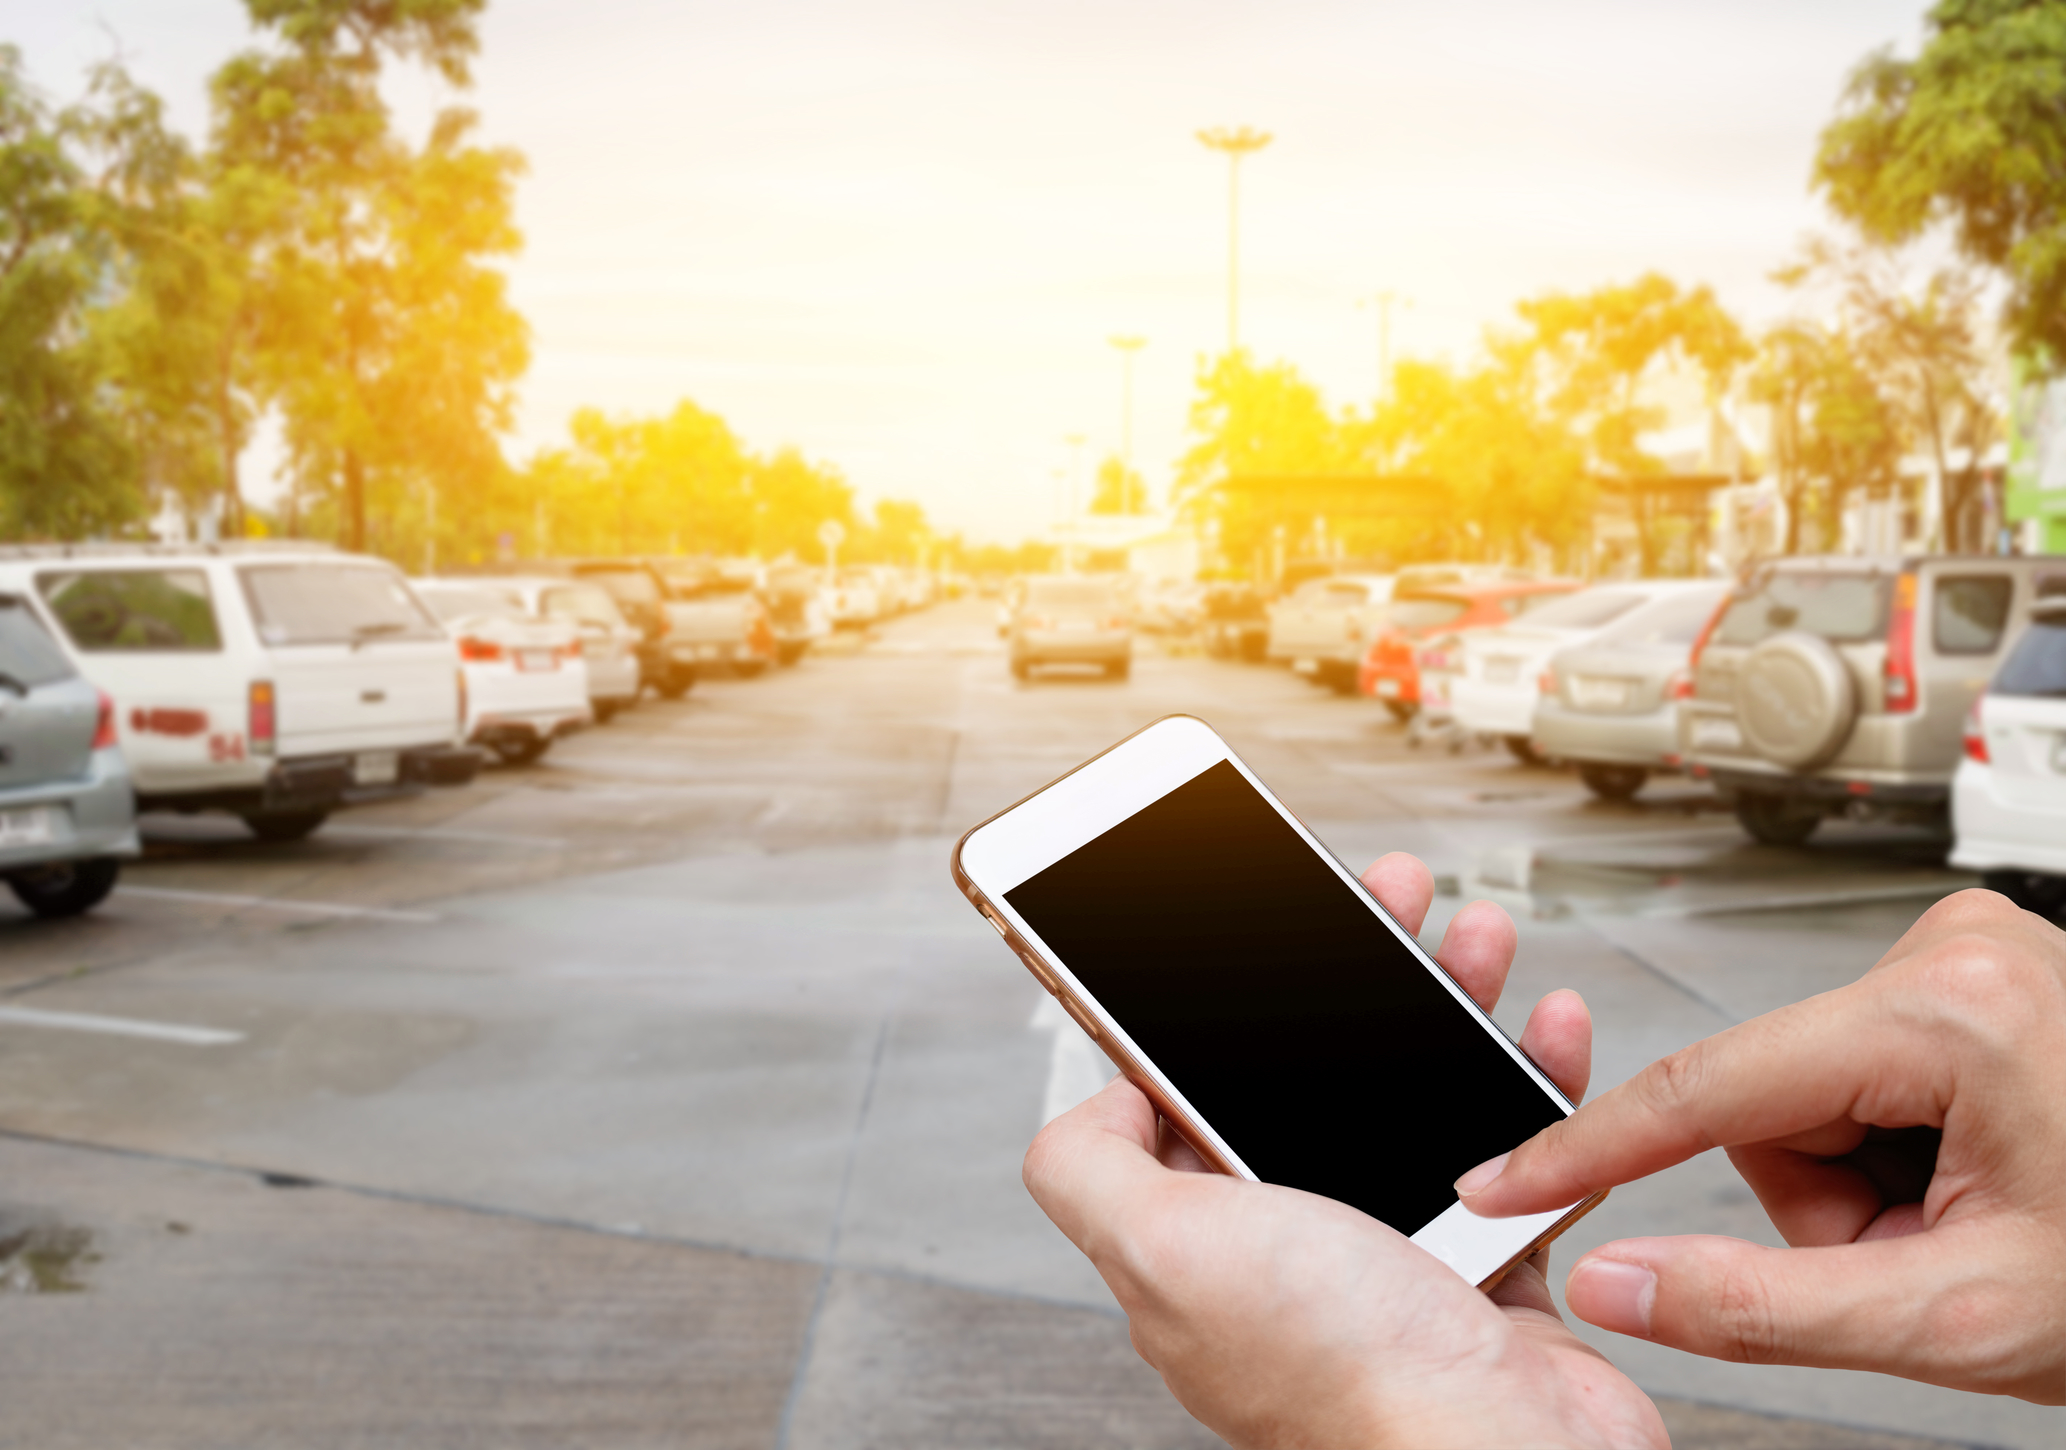 These parking apps will save you a lot of time, money and hassle